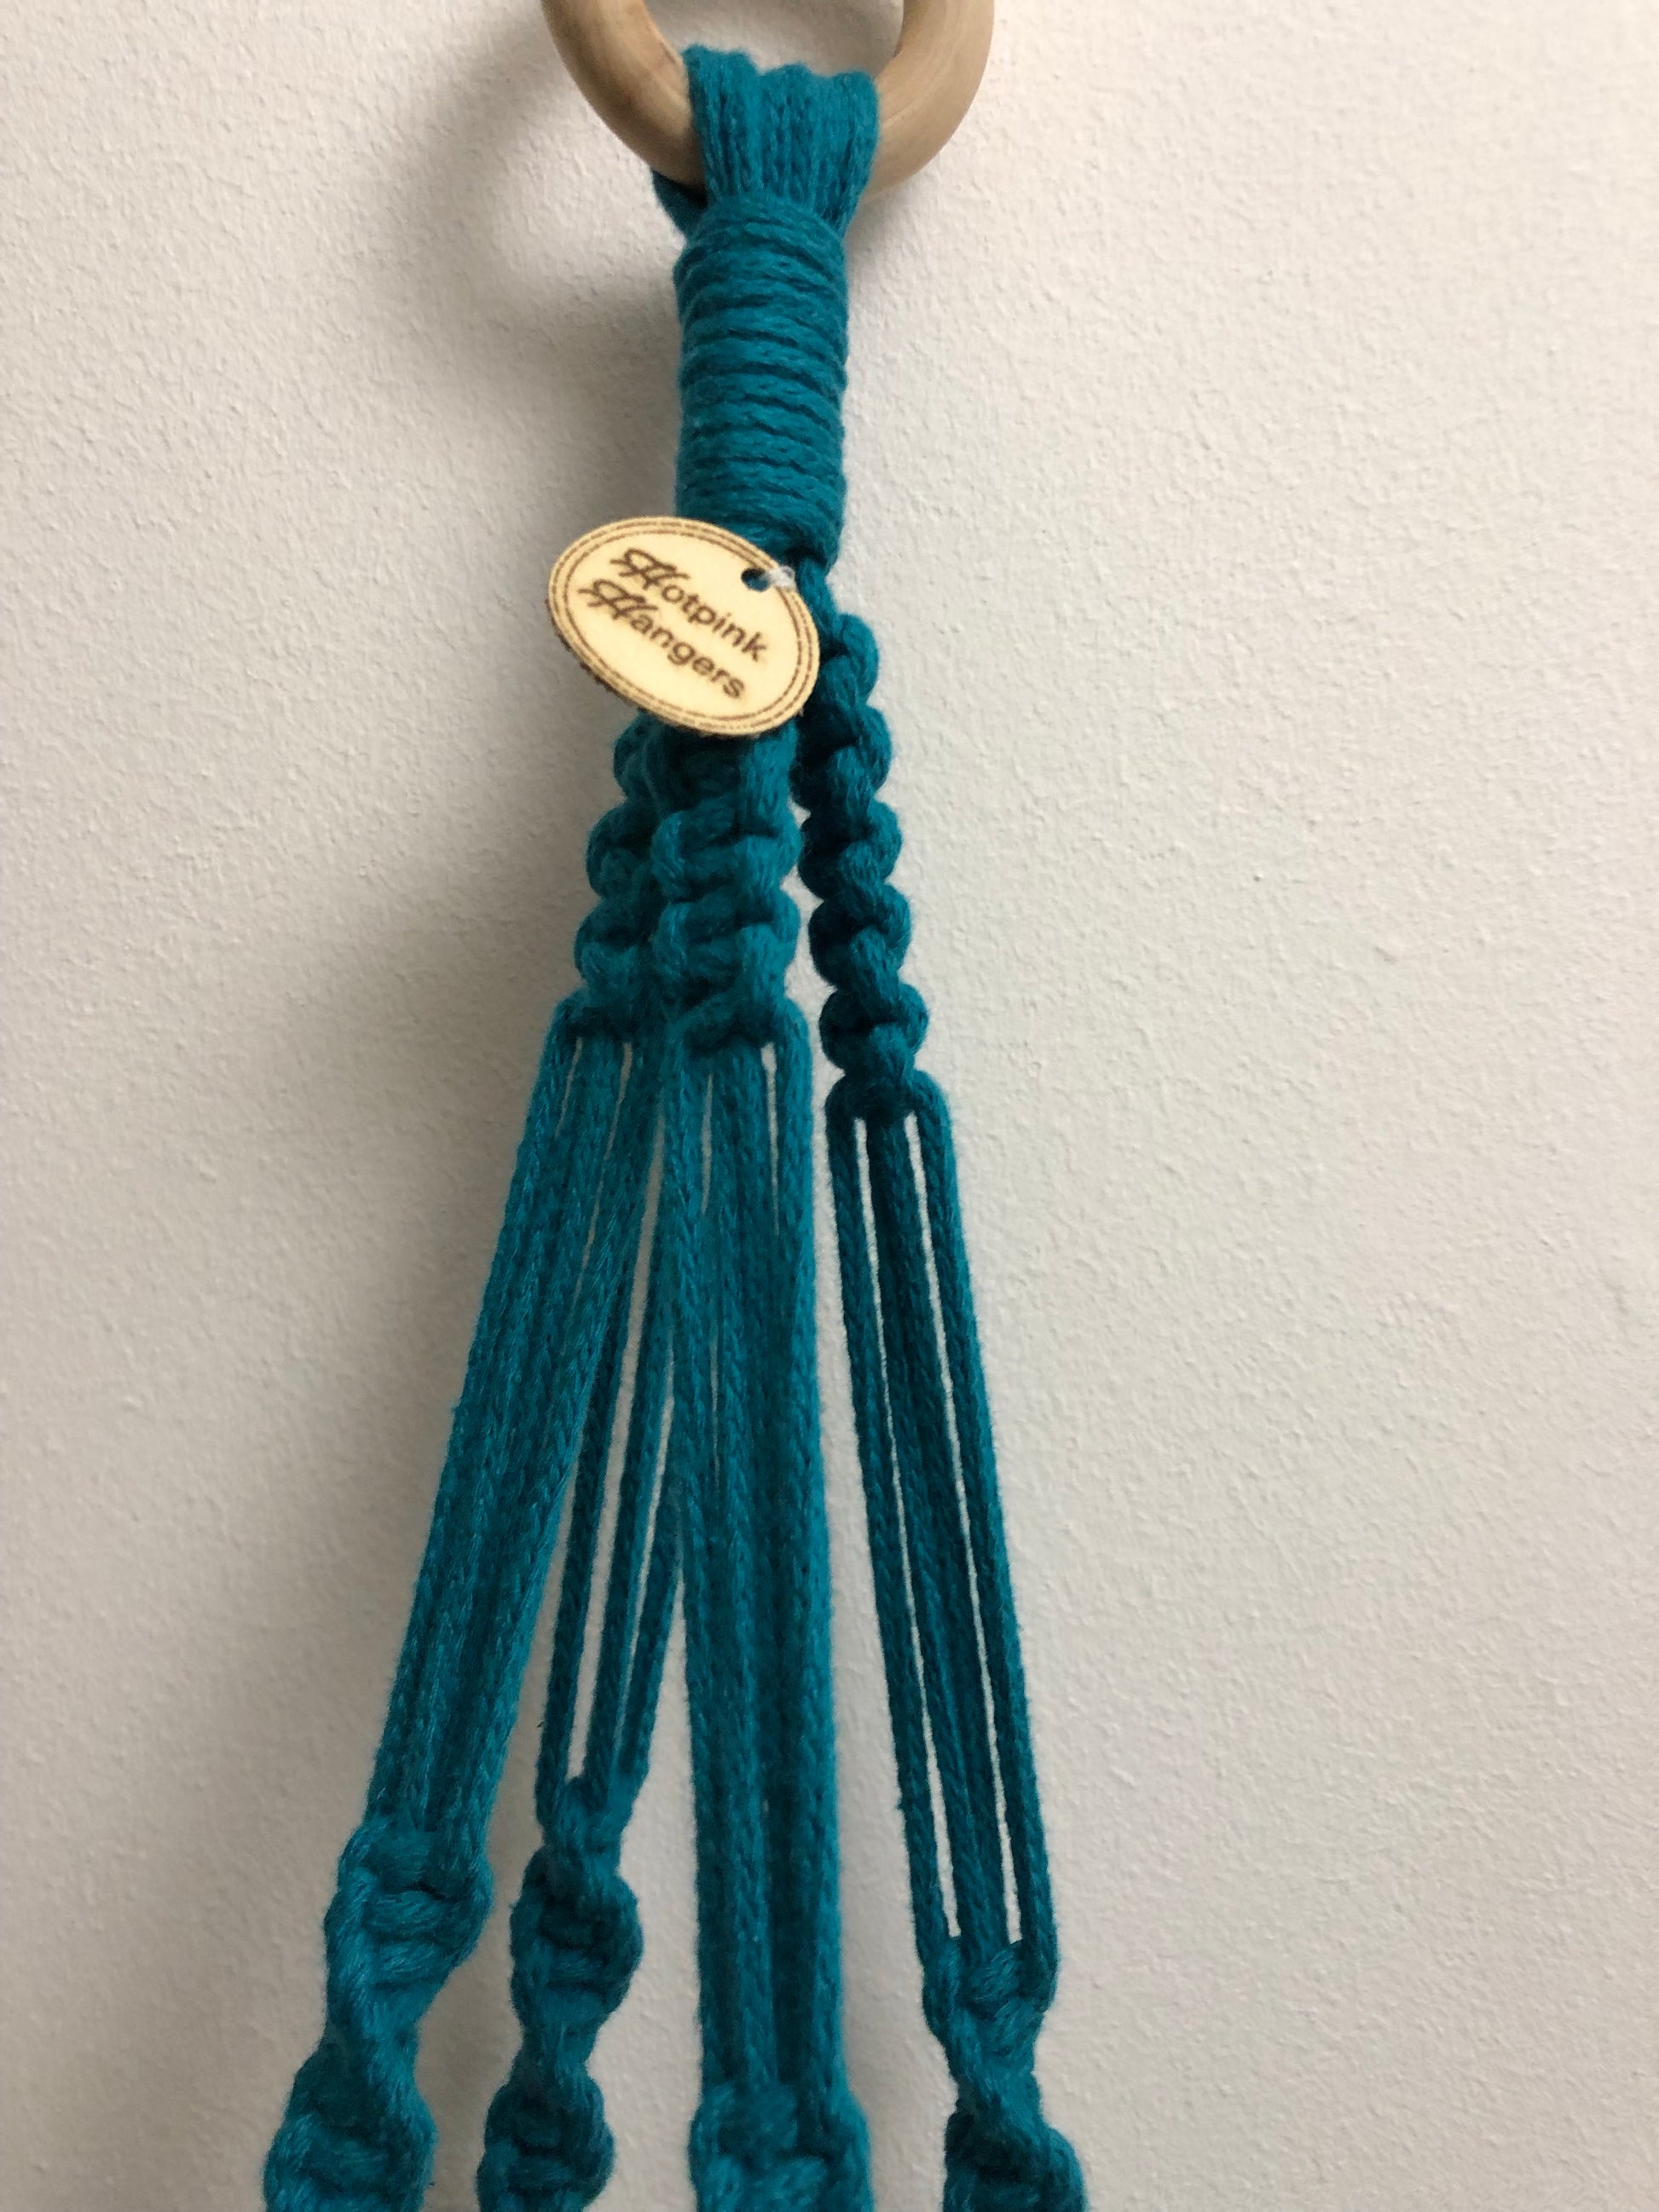 Buy Online Premium Quality and Beautiful Teal Macrame Plant Hanger - Hotpinkhangers